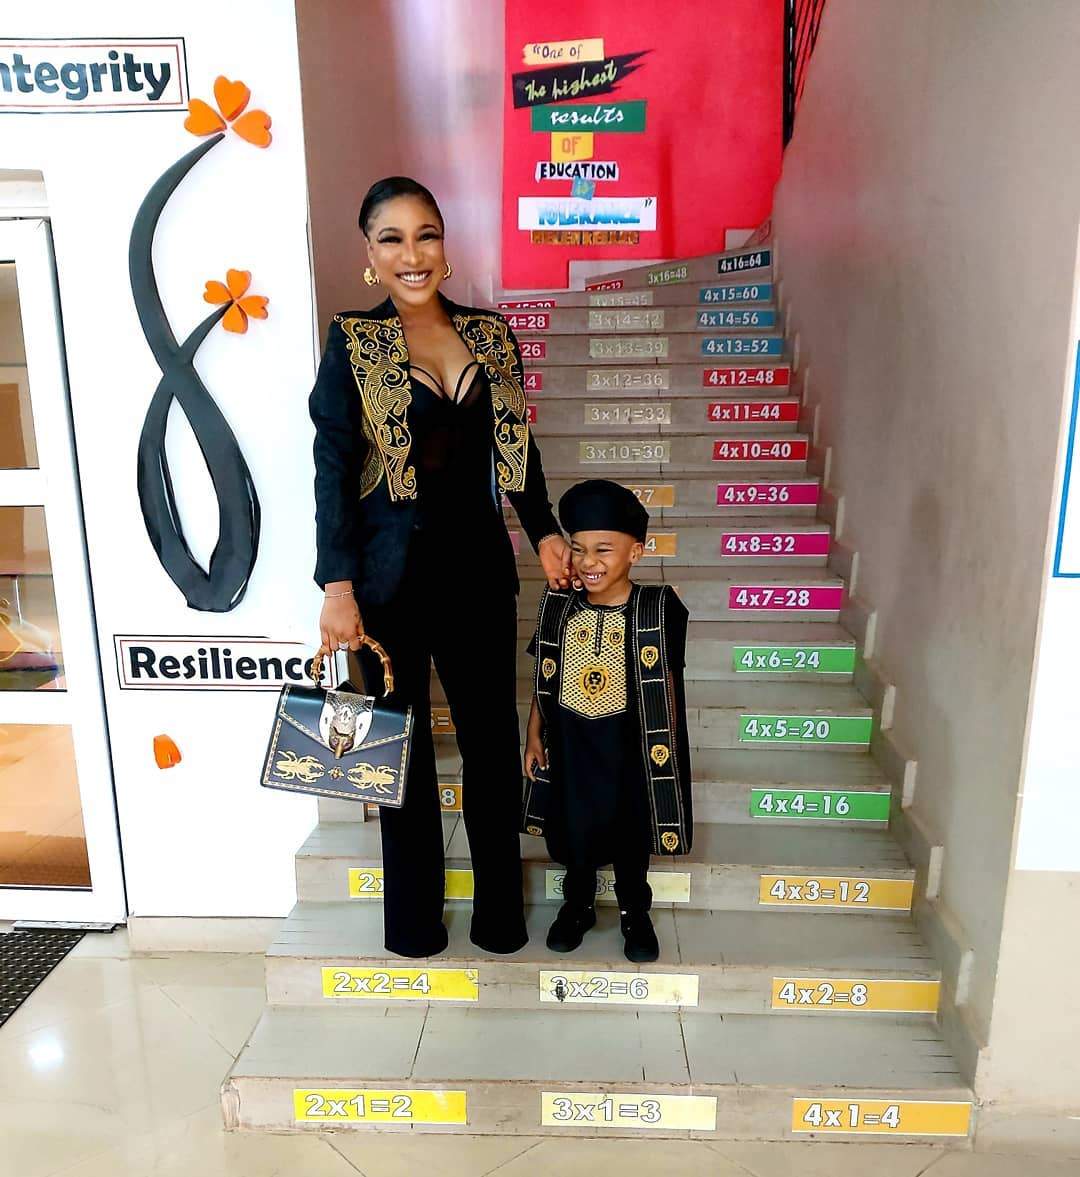 Tonto Dikeh asked to bring a Yoruba dish for her son's cultural day but what she came up with a rather funny dish of her own (Photo)